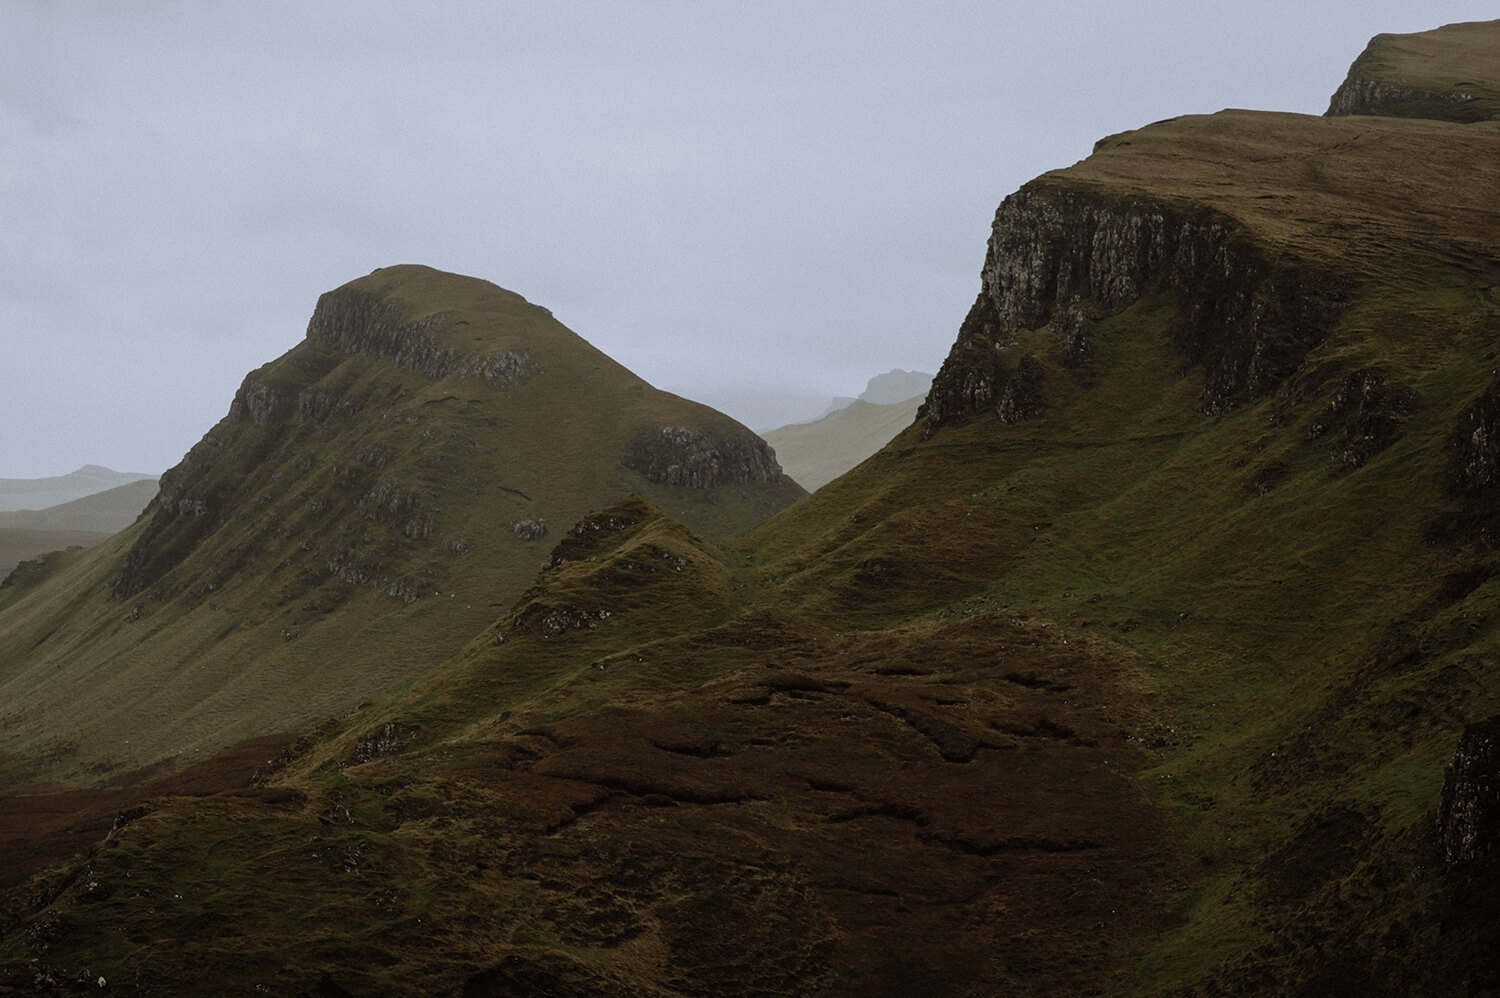 Landscape photography from the Scottish mountains.